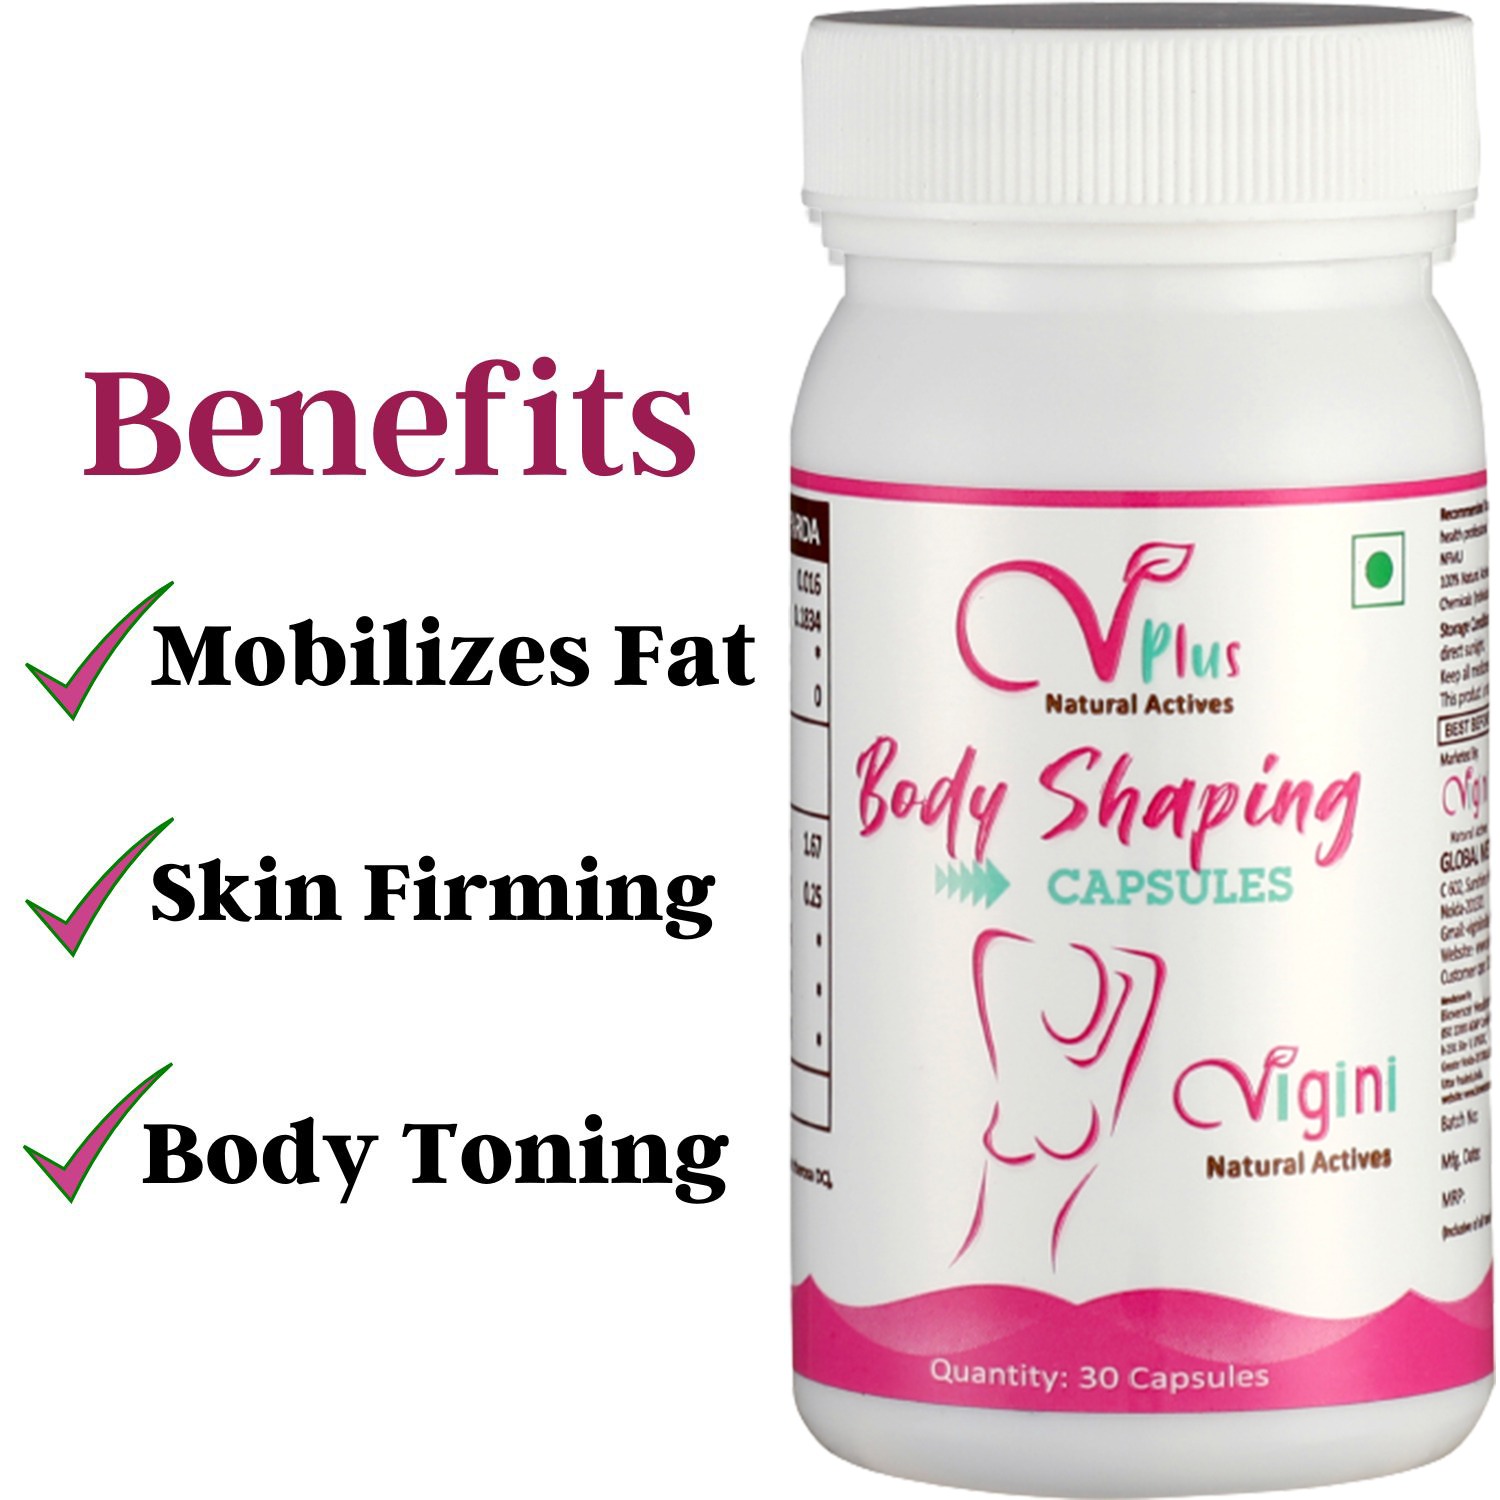 Vigini Breast Enlargement Size Increase Bust Full Growth 36 Shaping Firming Tightening Women Capsules With Safe Herbal Ingredients